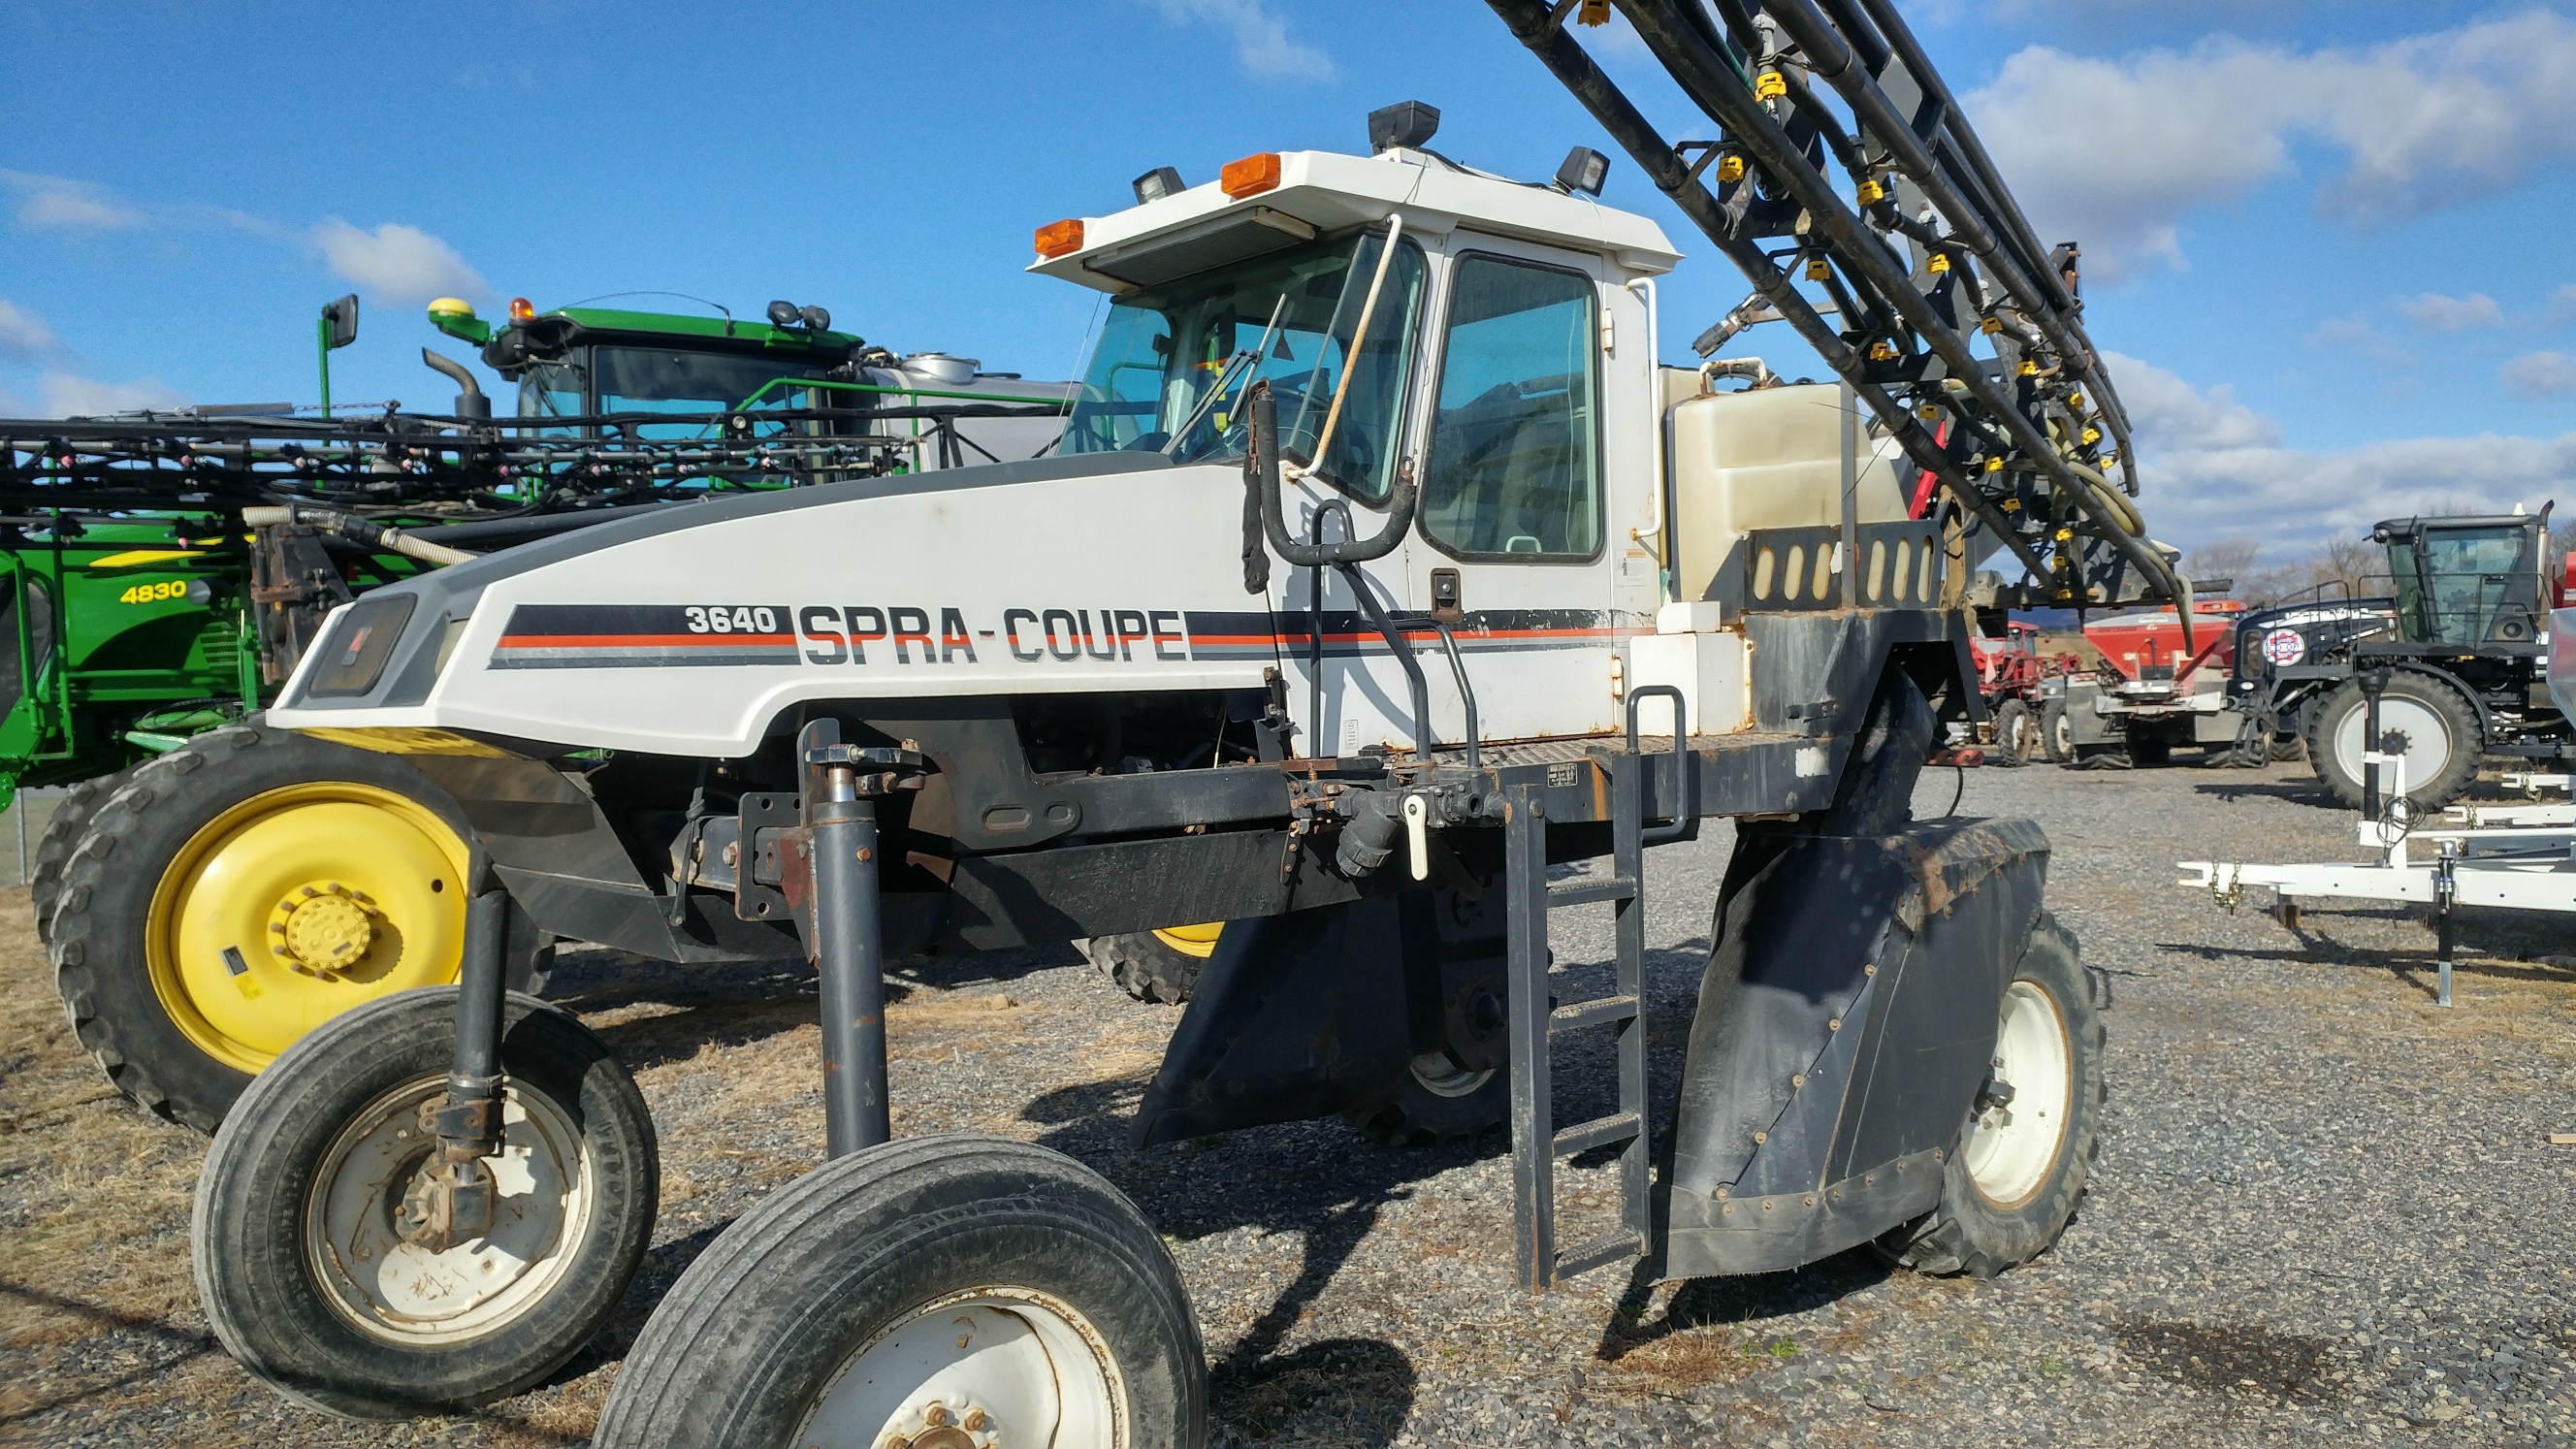 2000 Spra-Coupe 3640 Sprayer/High Clearance for sale in Biglerville, PA